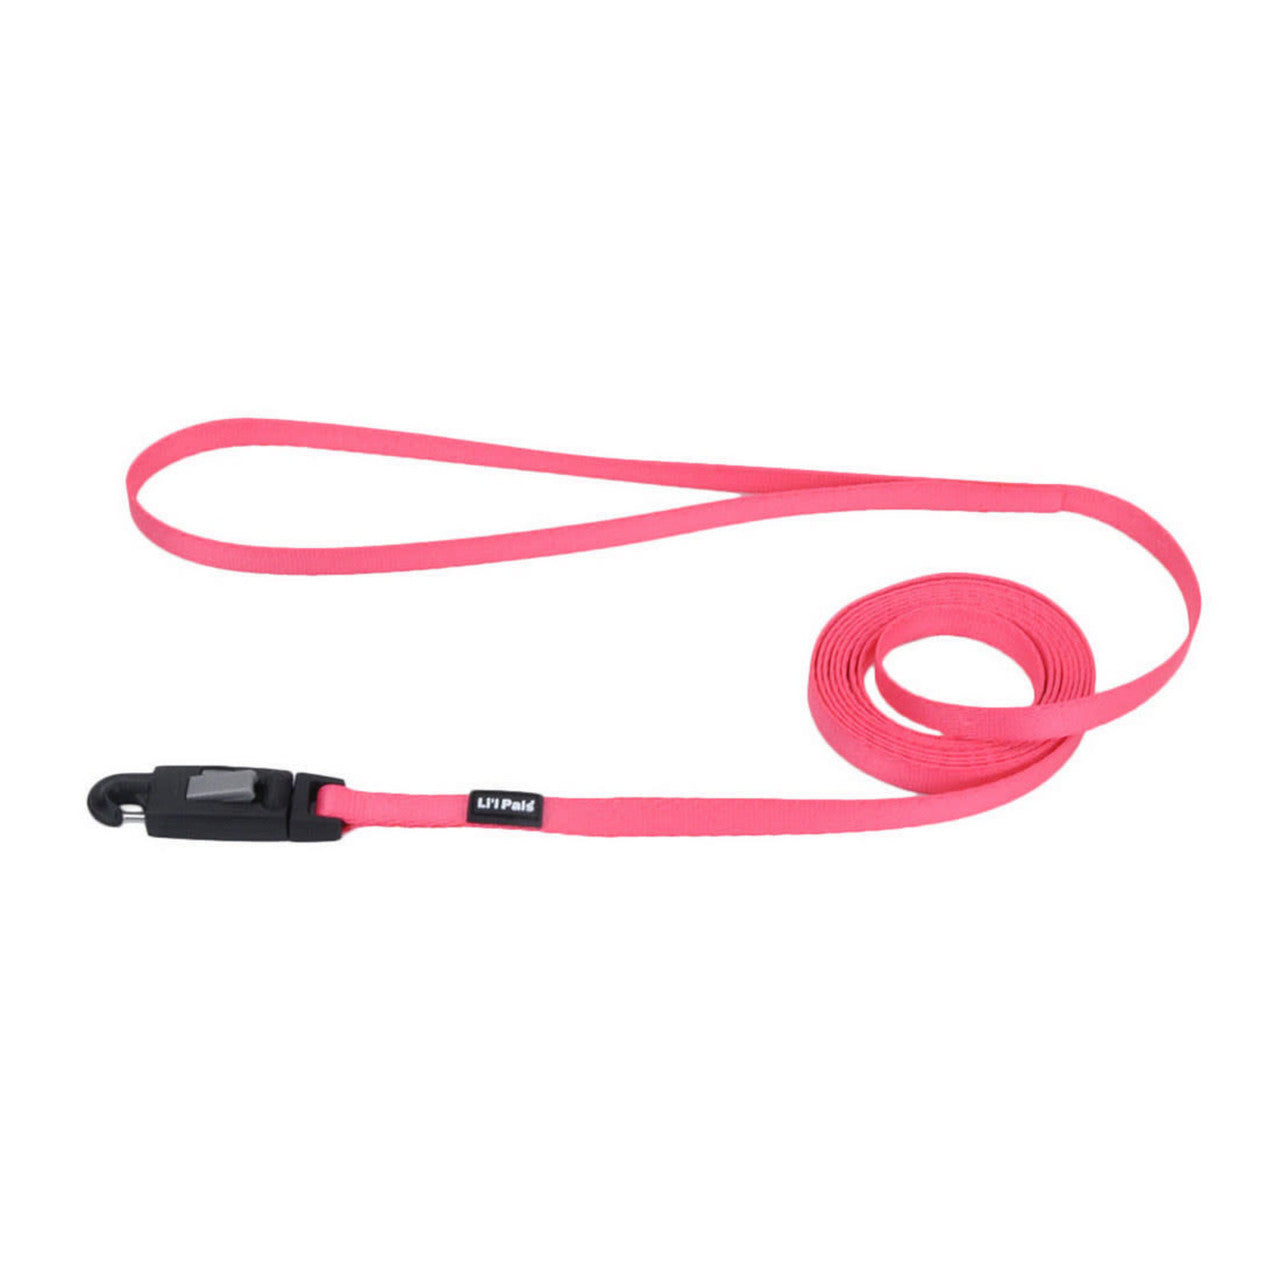 Lil Pals Nylon Dog Leash with E-Z Snap Neon Pink 3/8 in x 6 ft